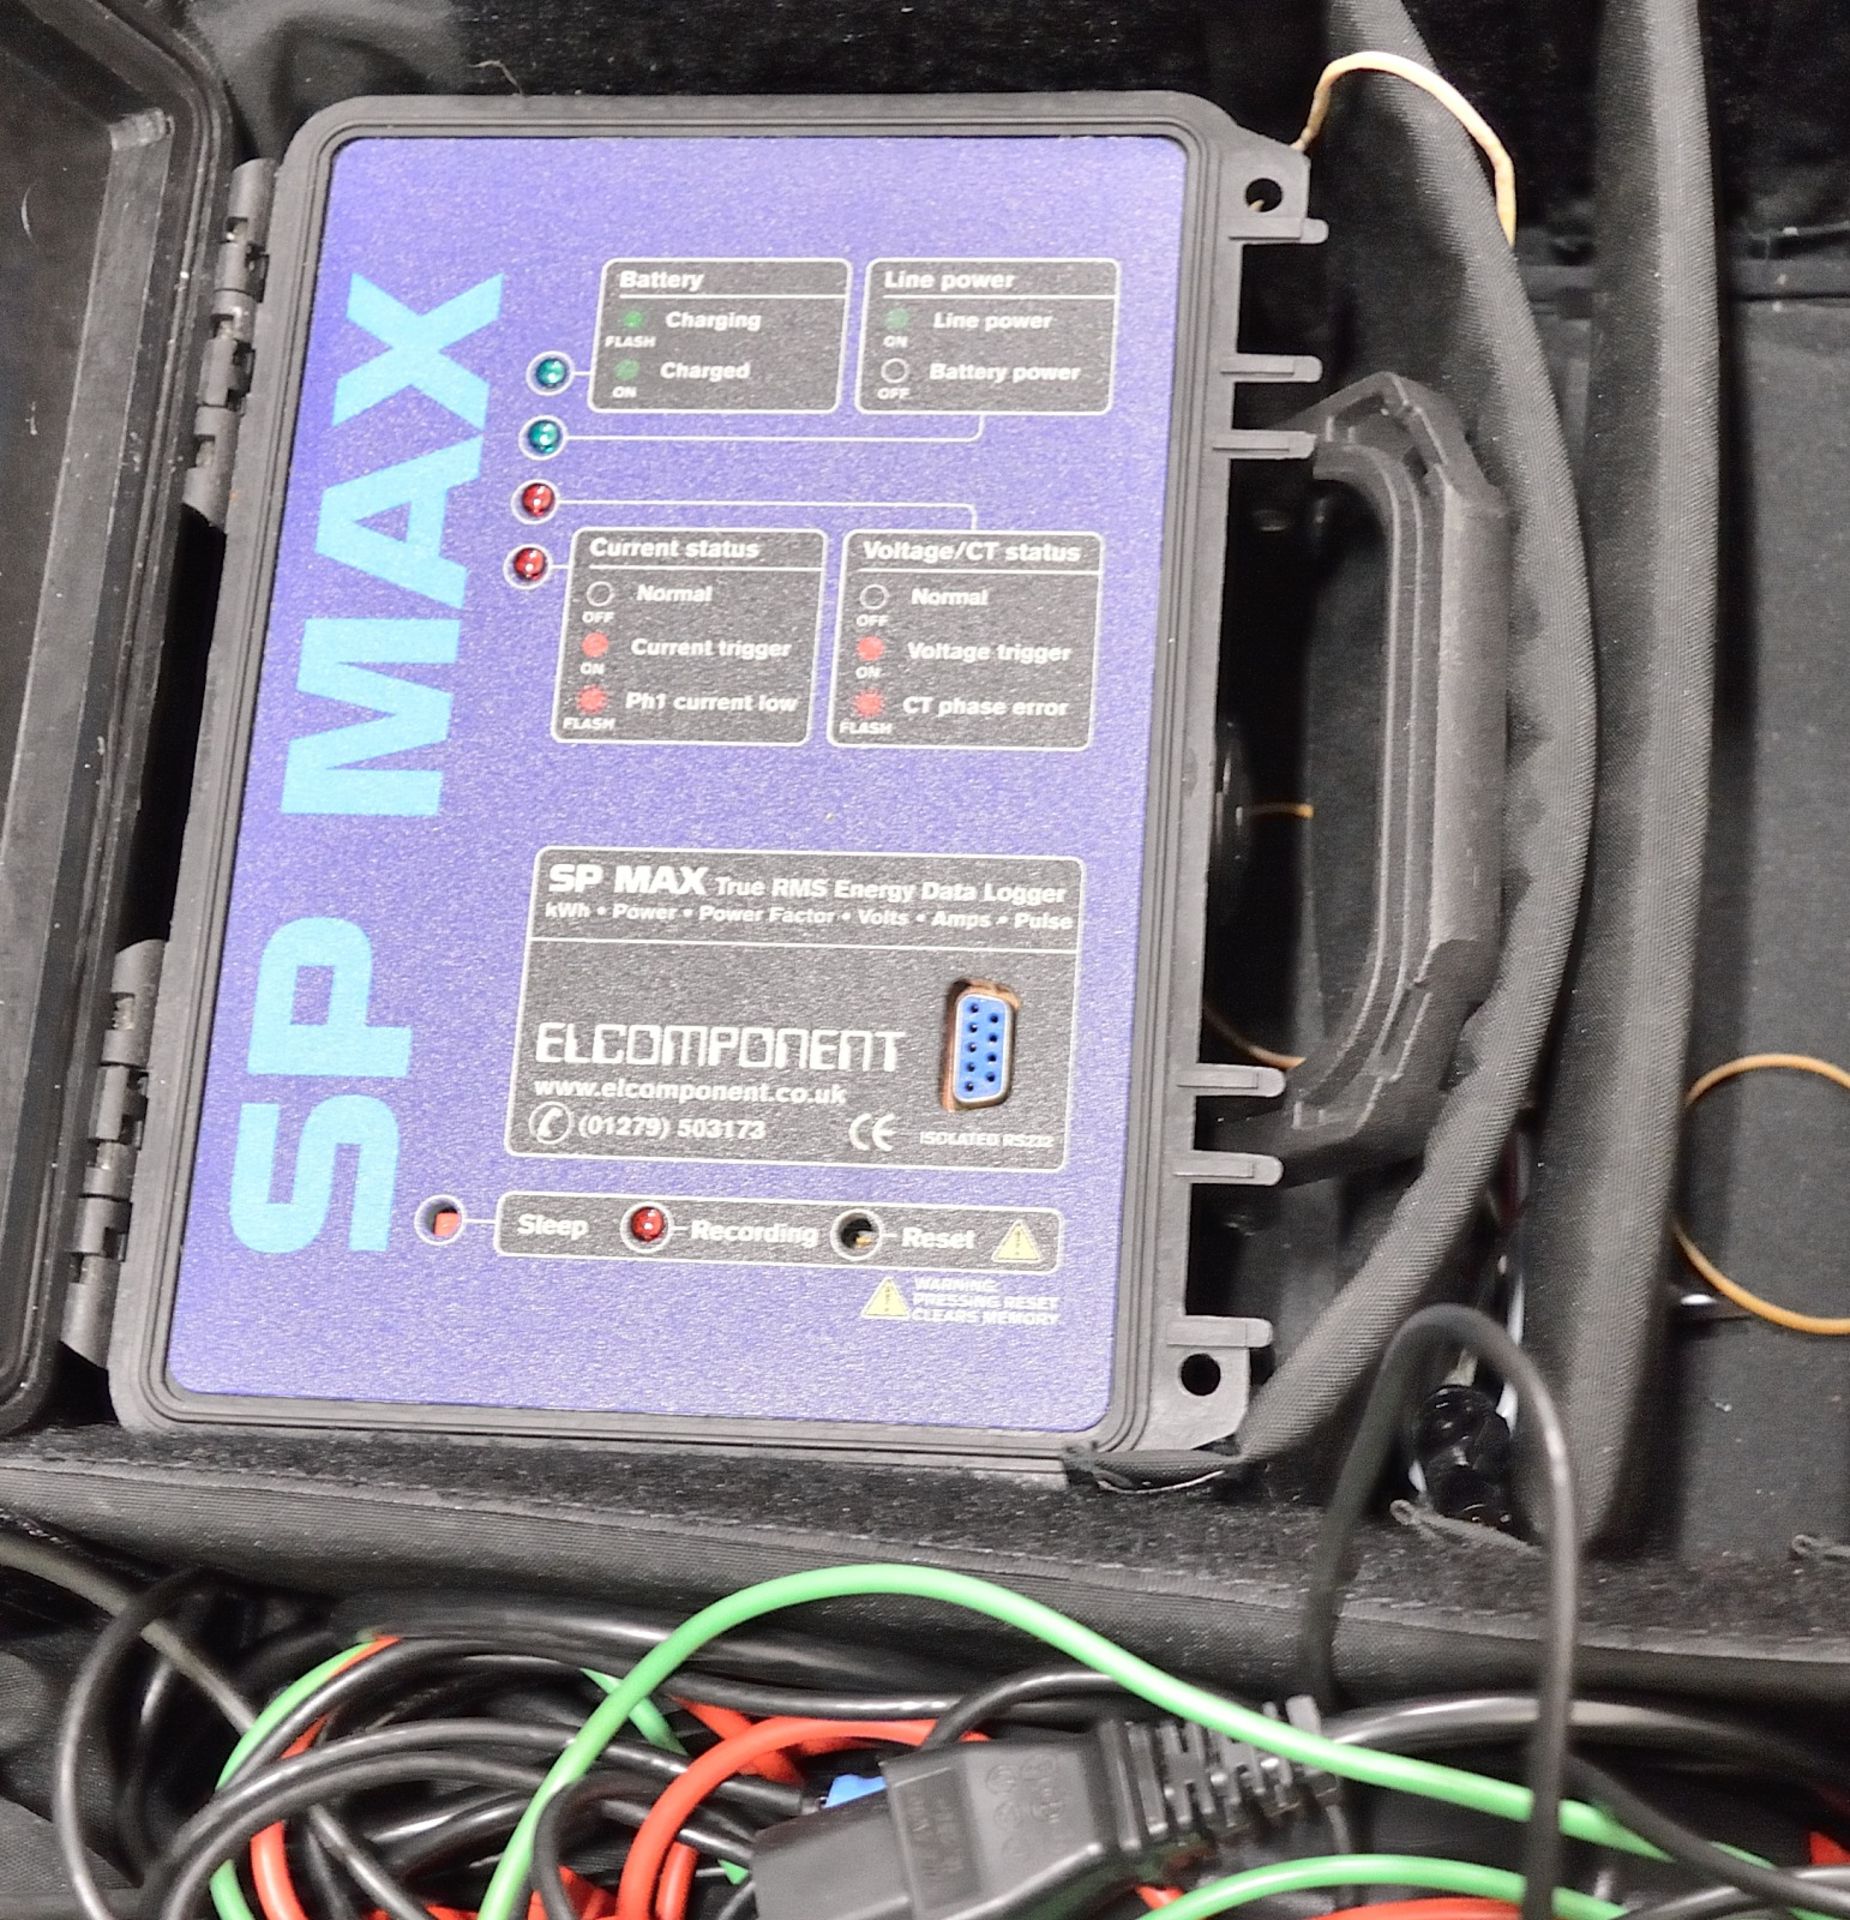 Elcomponent Energy Profile Logger SP Max. - Image 2 of 2